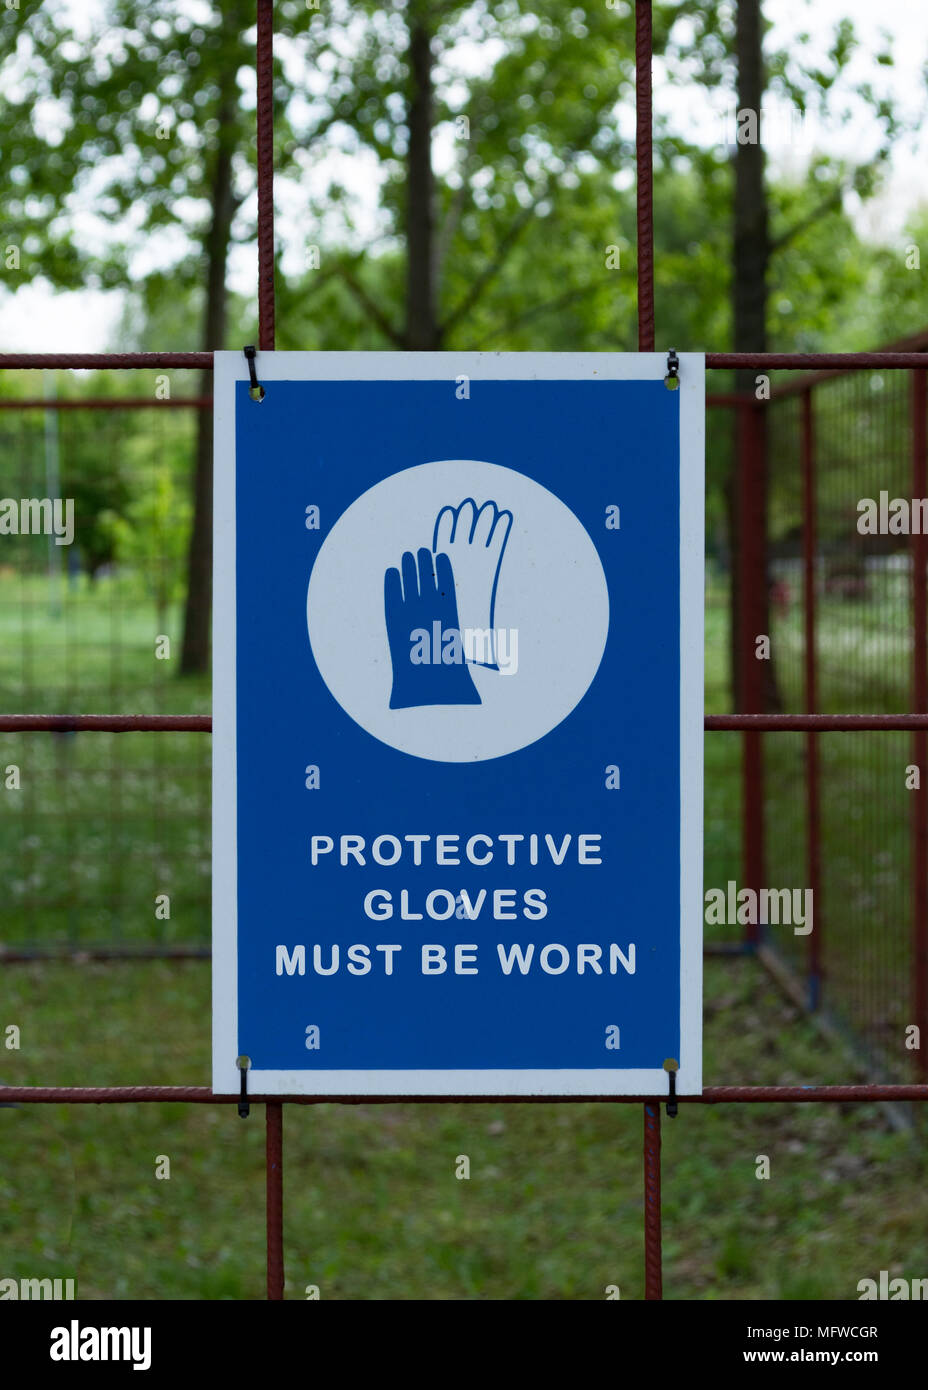 Protective safety gloves must be worn, mandatory sign. Stock Photo